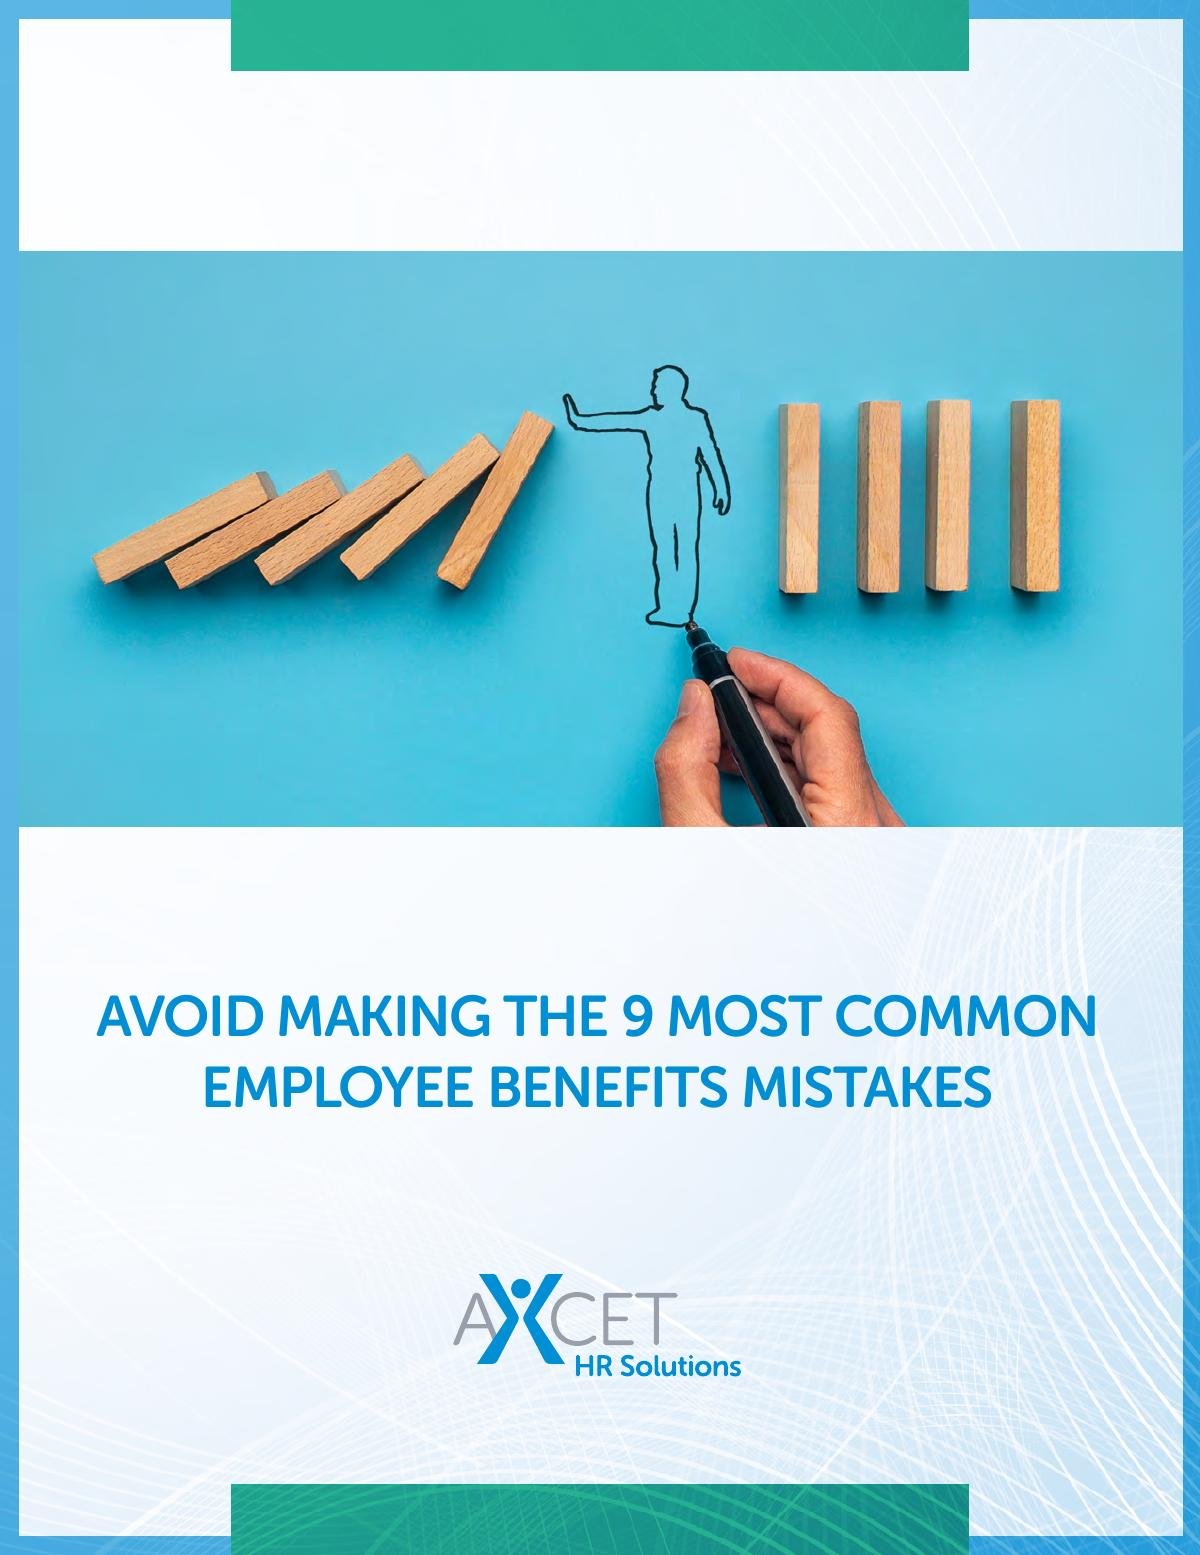 Avoid Making the 9 Most Common Employee Benefits Mistakes